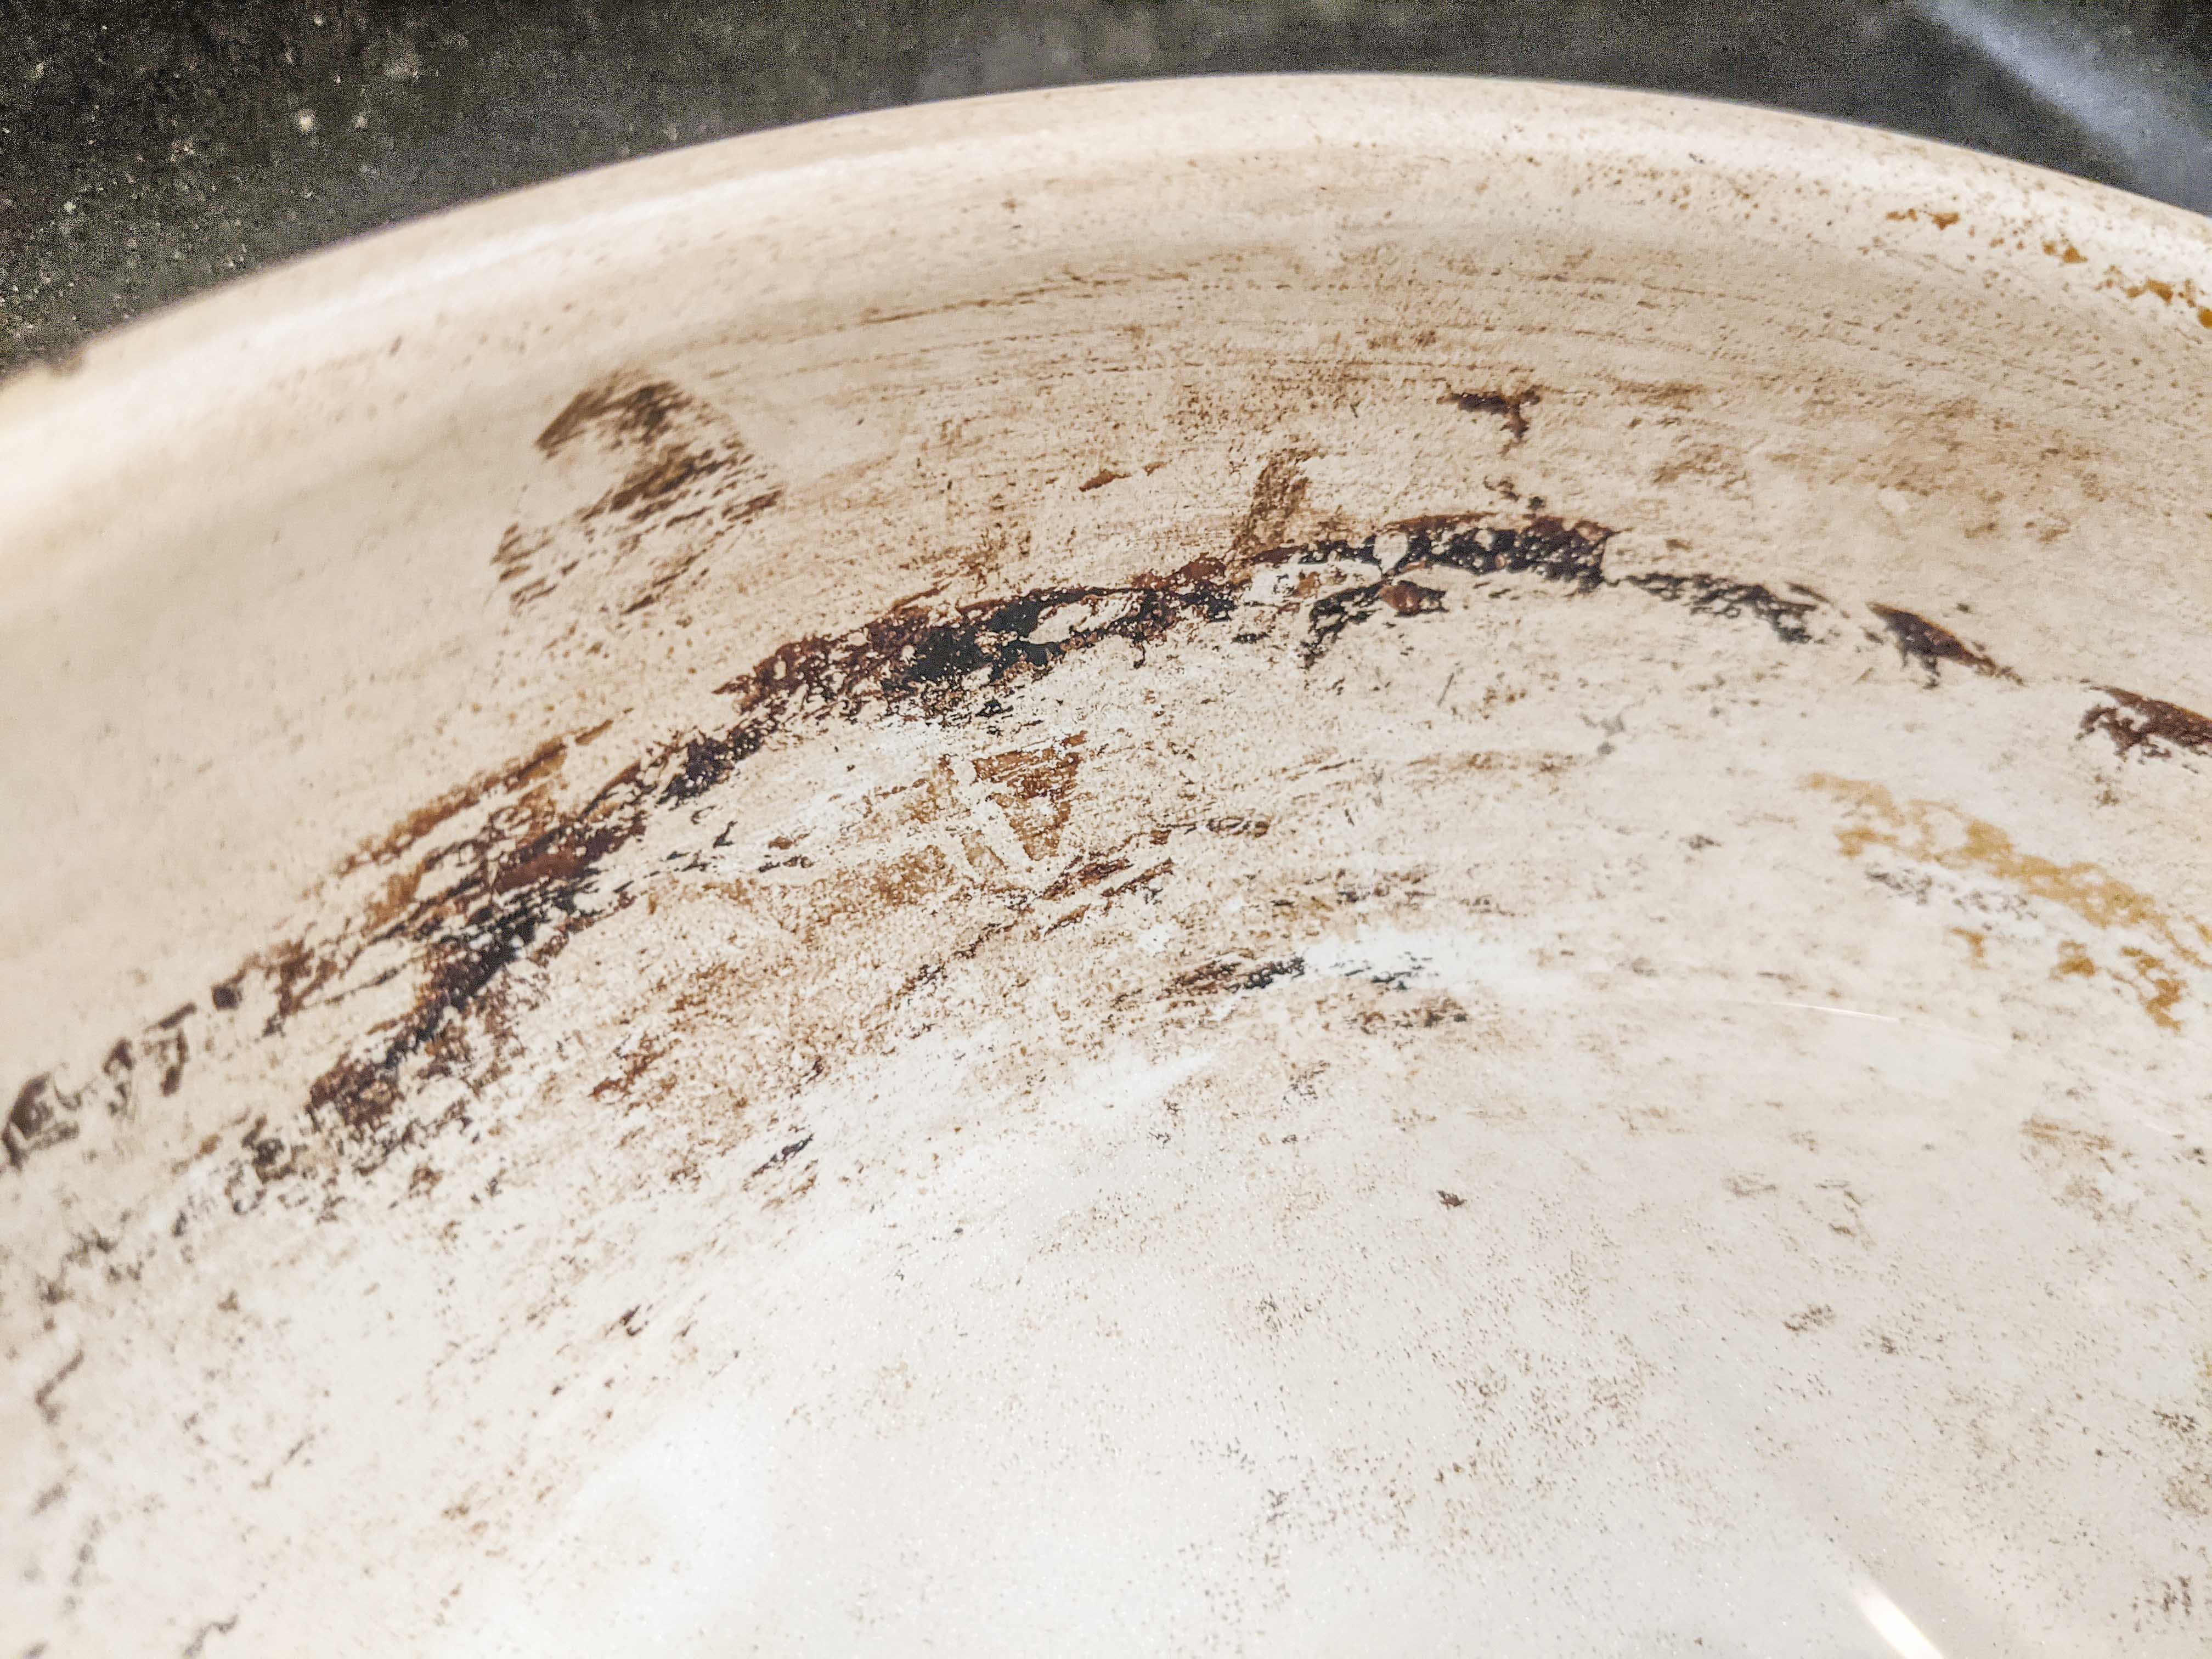 Cleaning oil burn marks from Le Creuset pot